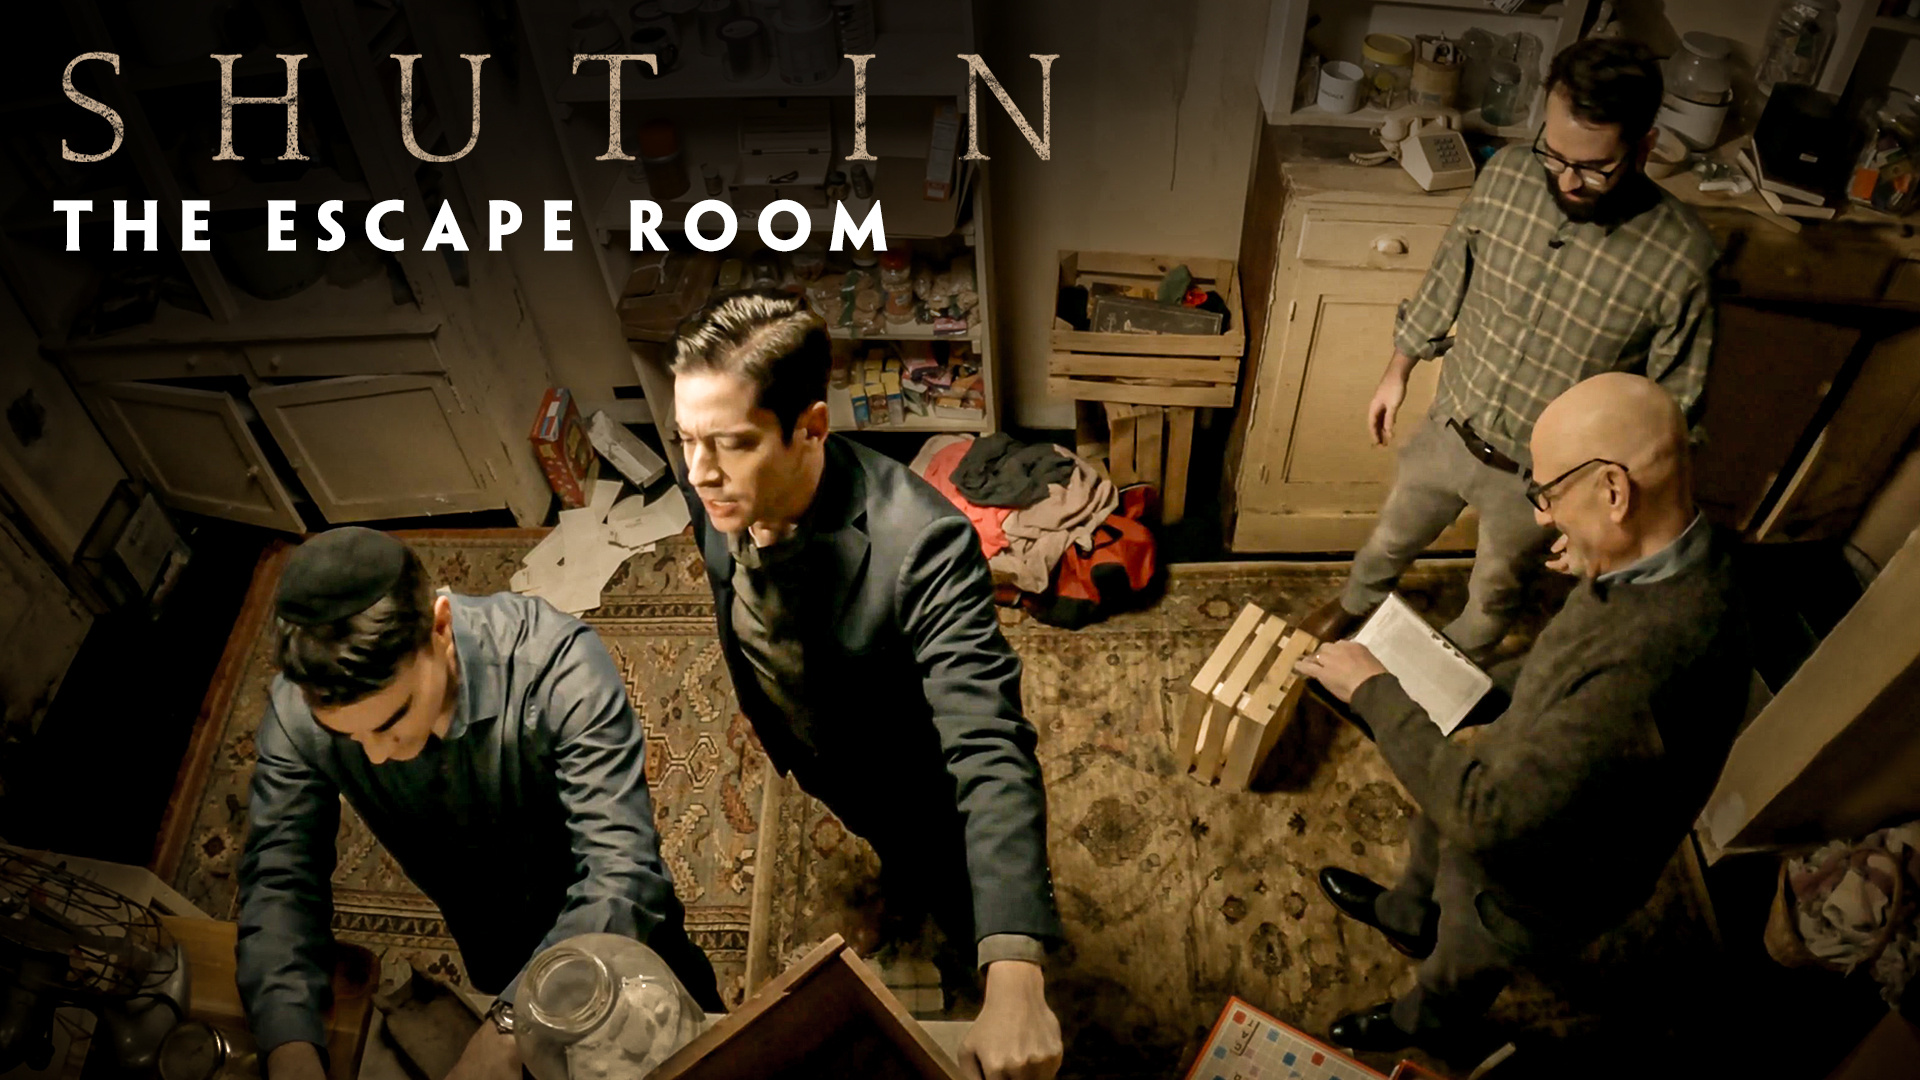 Shut In movie, The Daily Wire, Thrilling suspense, Edge-of-your-seat, 1920x1080 Full HD Desktop